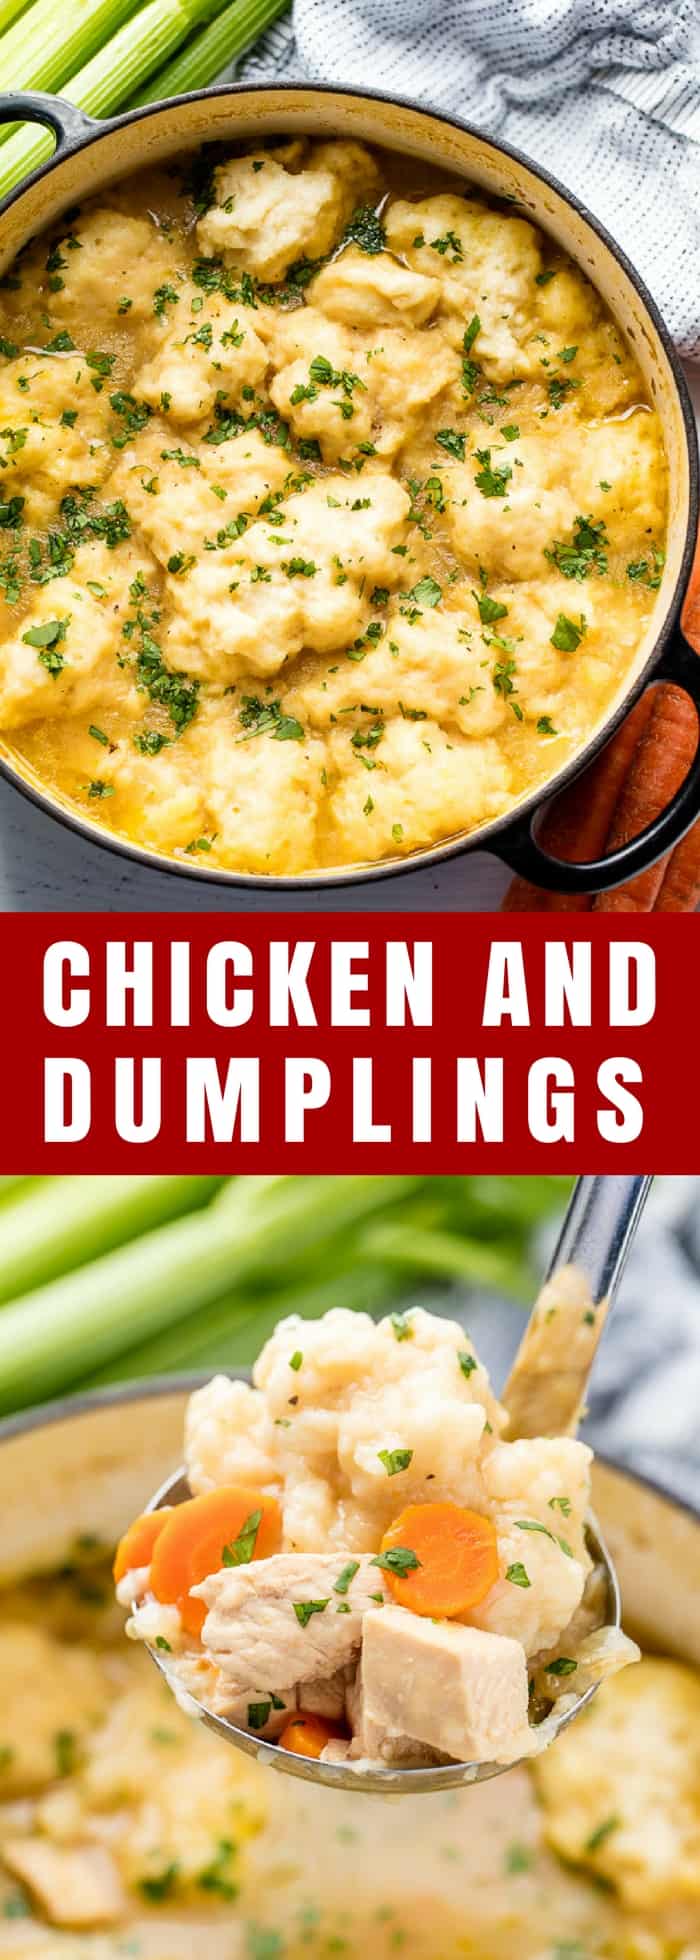 This easy Chicken and Dumplings Recipe is just like mom used to make! This recipe will teach you how to make chicken and dumplings that's full of old fashioned homemade goodness. 